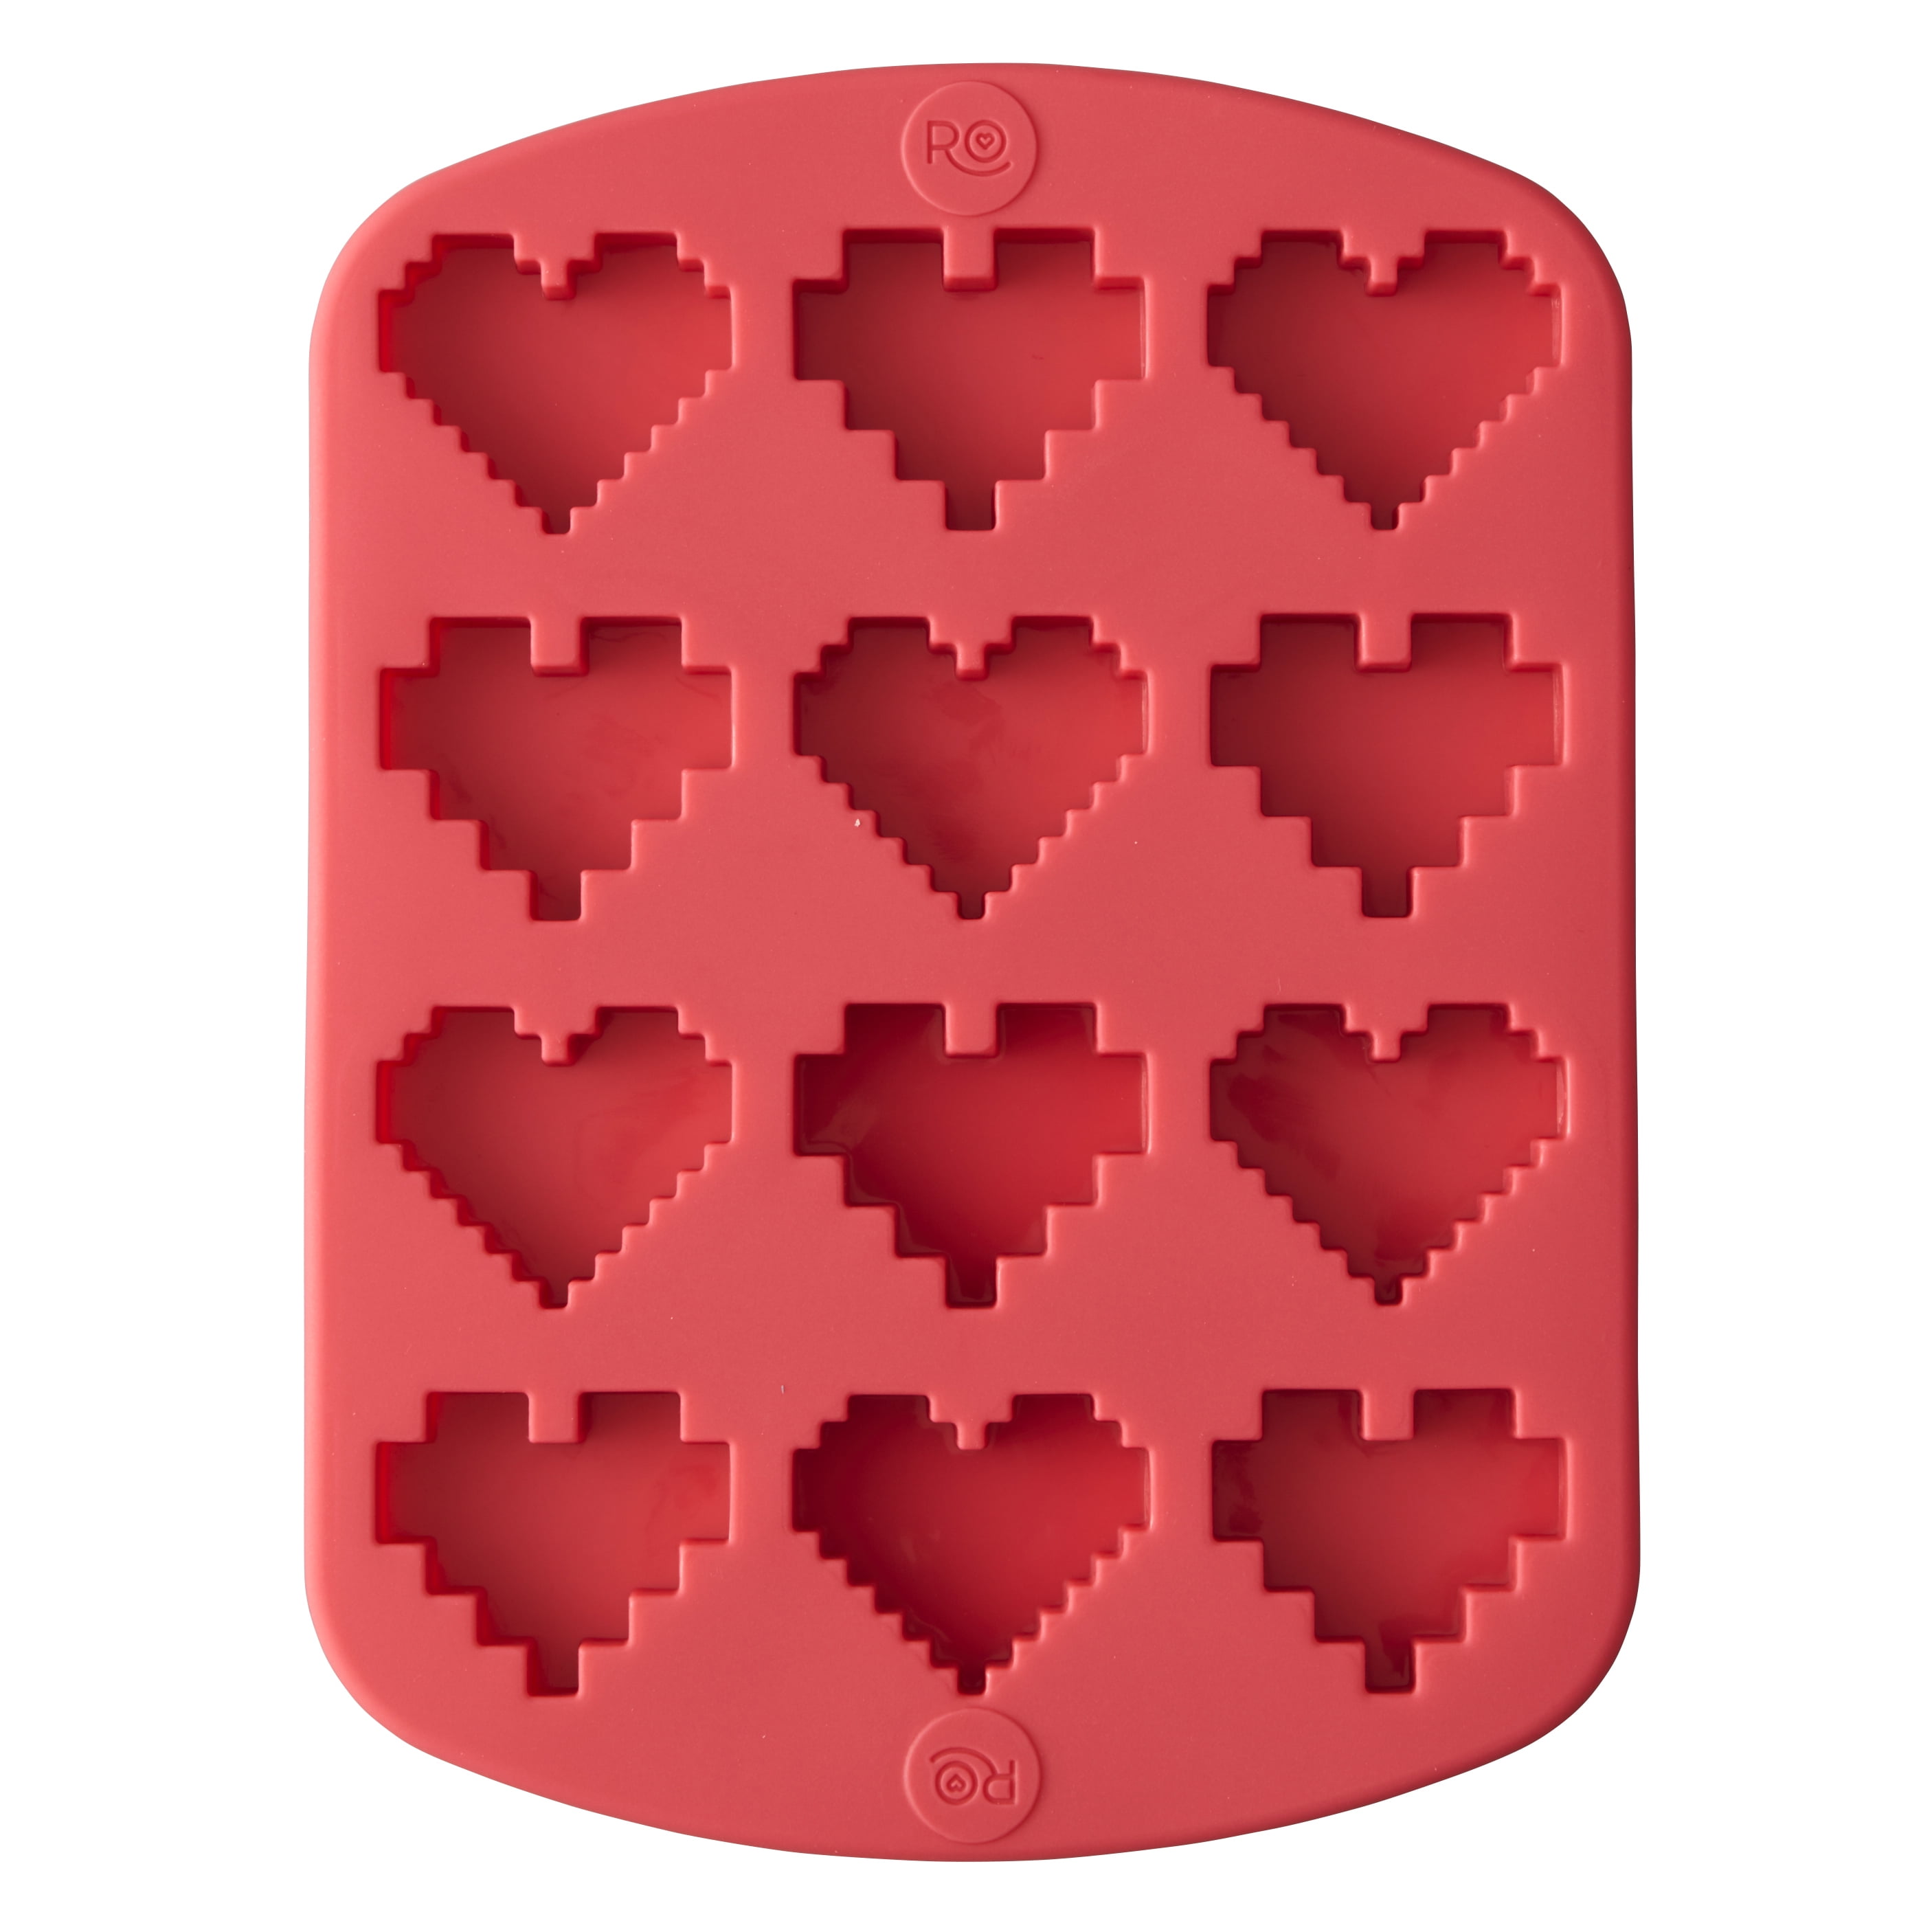 Heart-Shaped Valentine's Day Silicone Baking and Candy Mold, 12